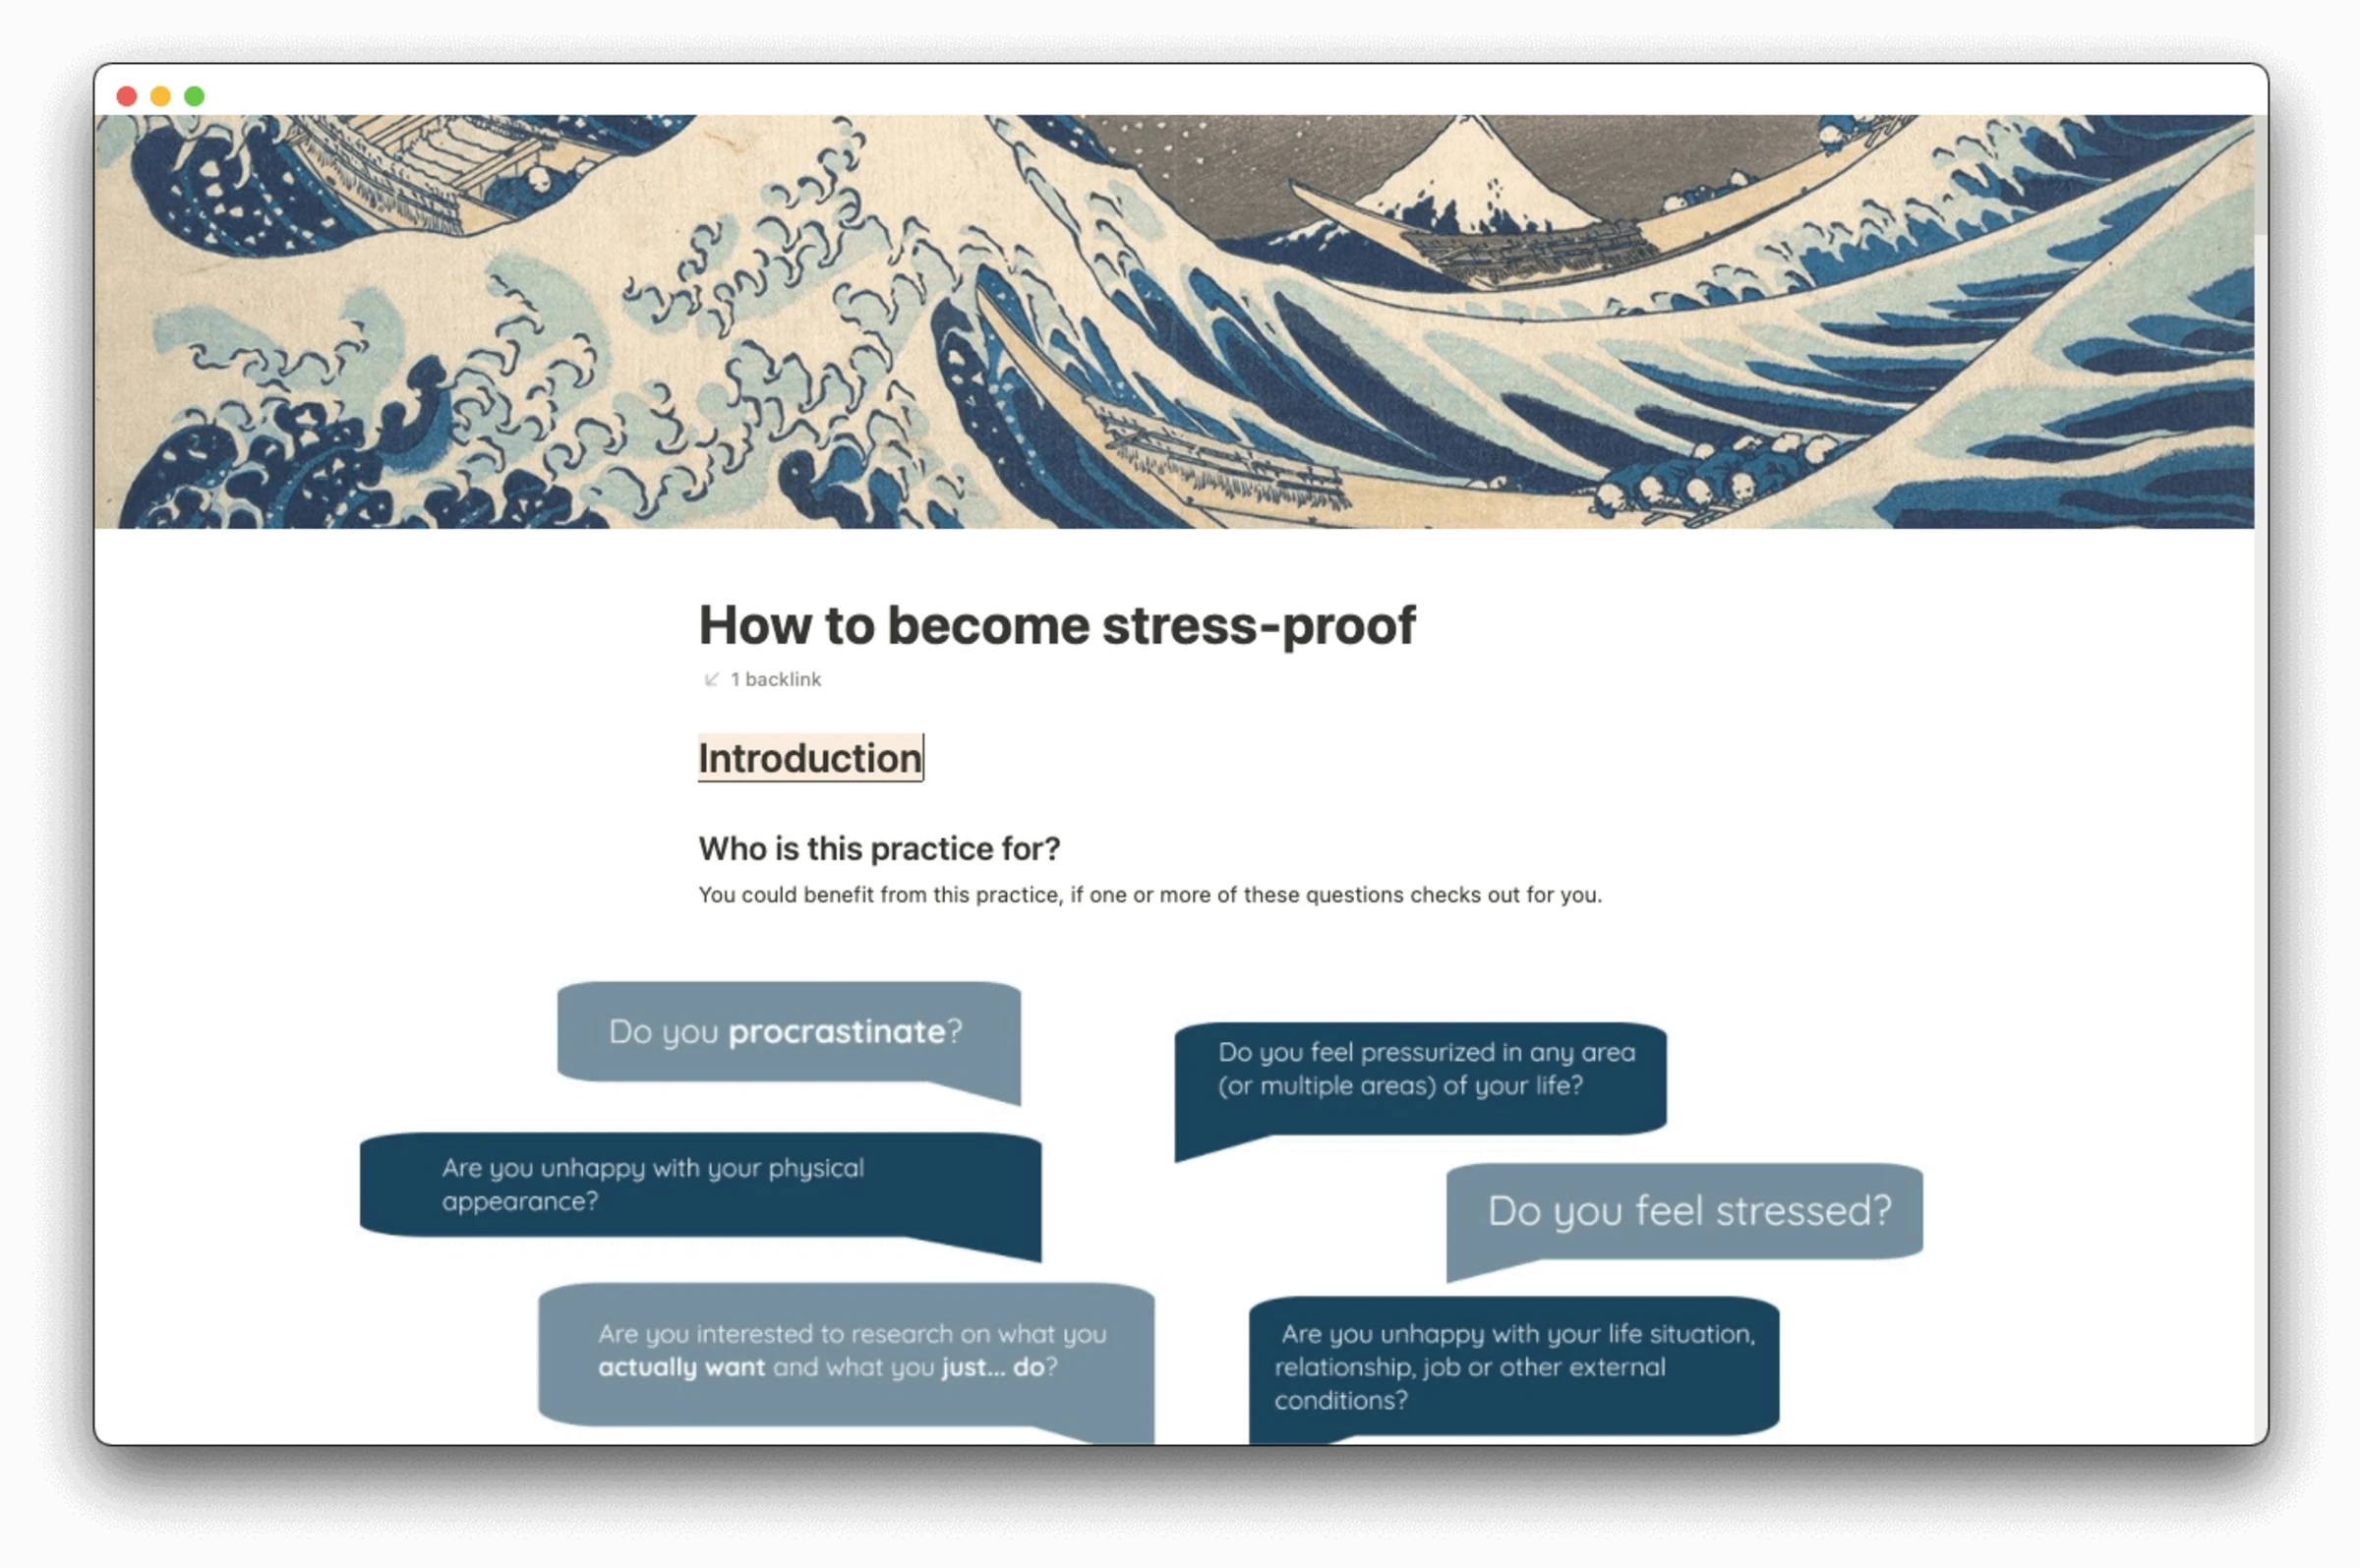 How To Become Stress-Proof